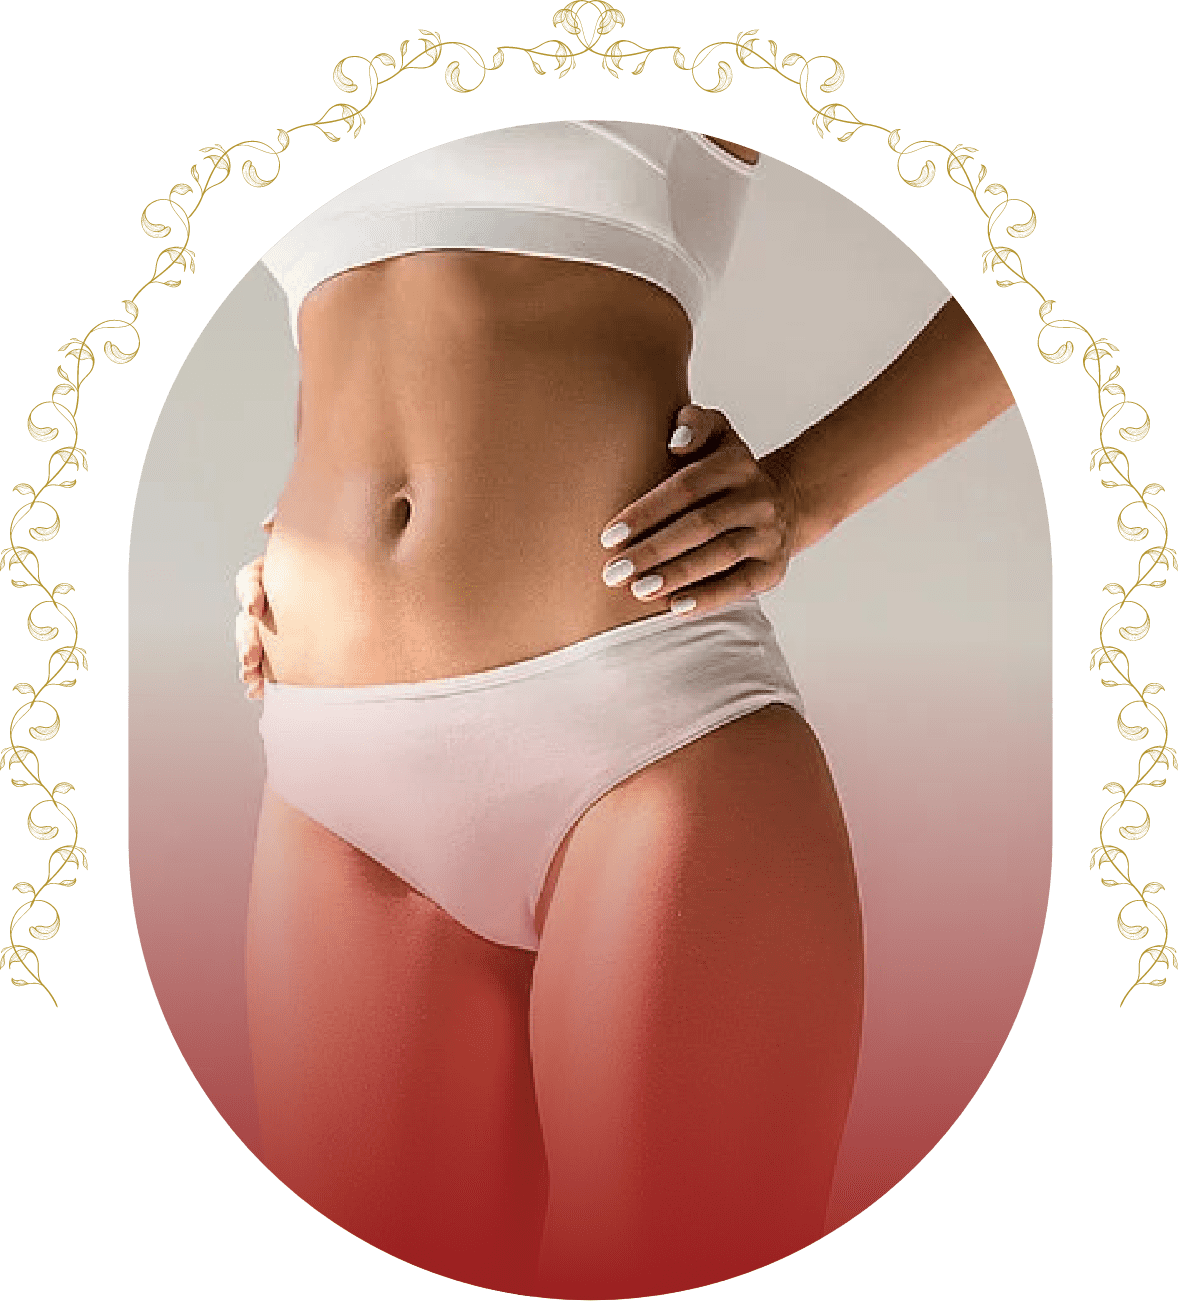 Mommy Makeover Surgery in India